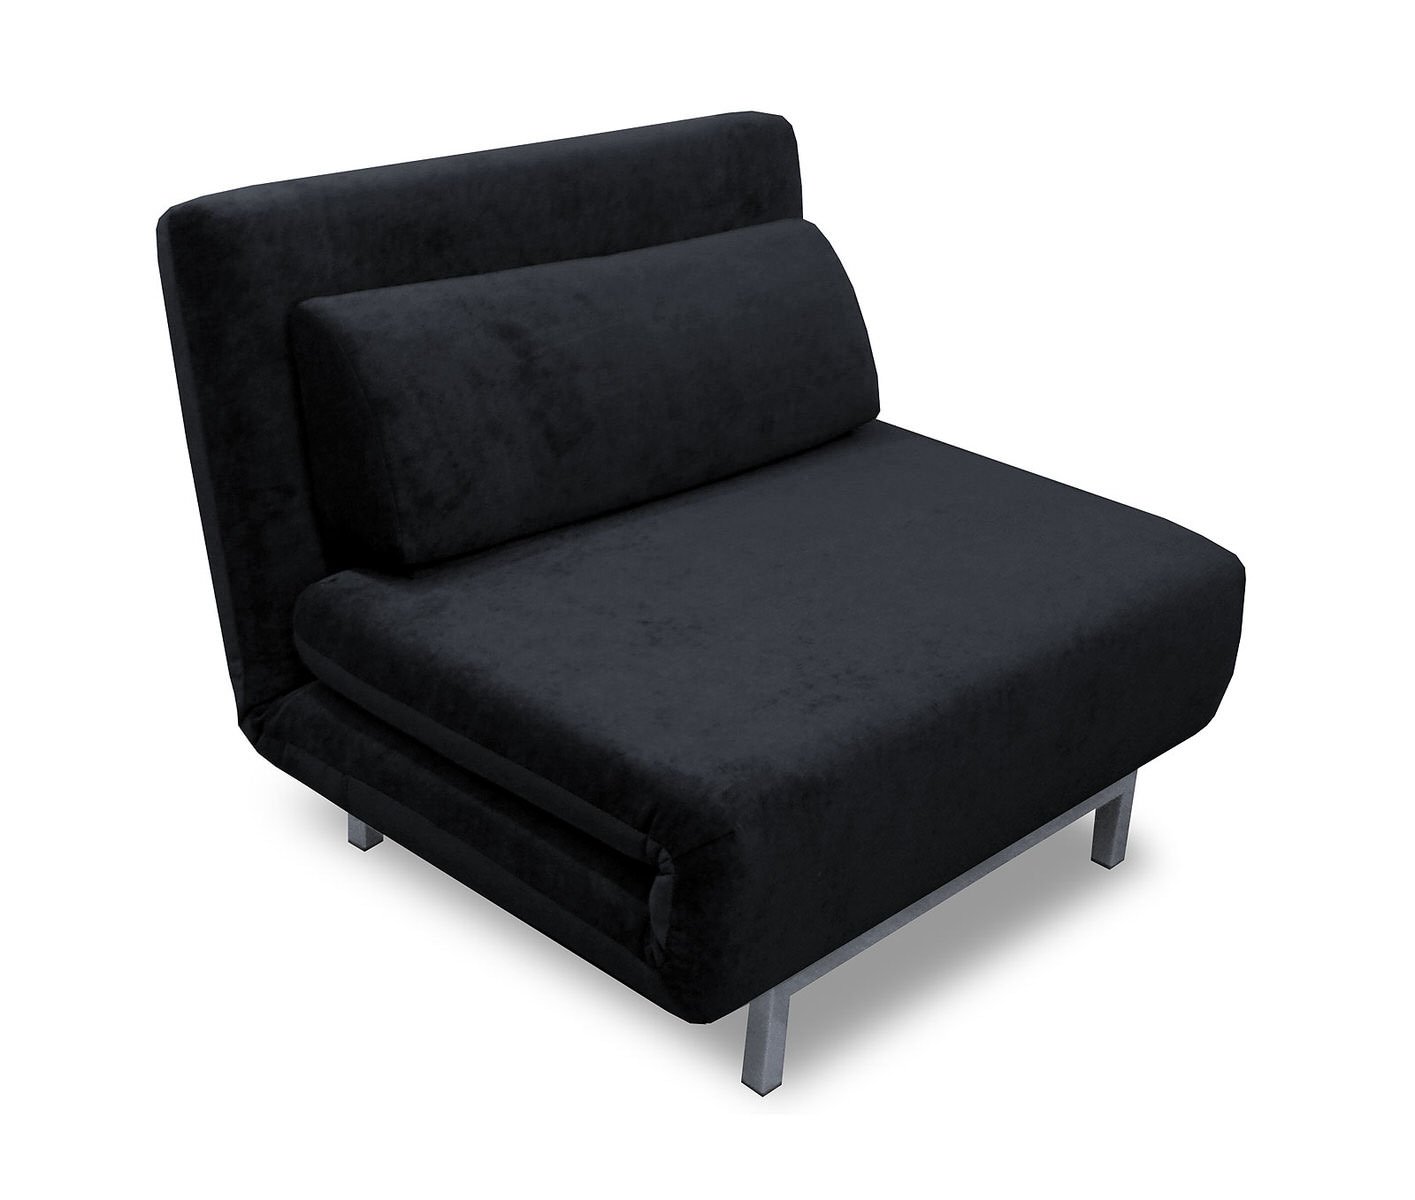 Convertible Black Chenille Chair-Bed LK06 by IDO